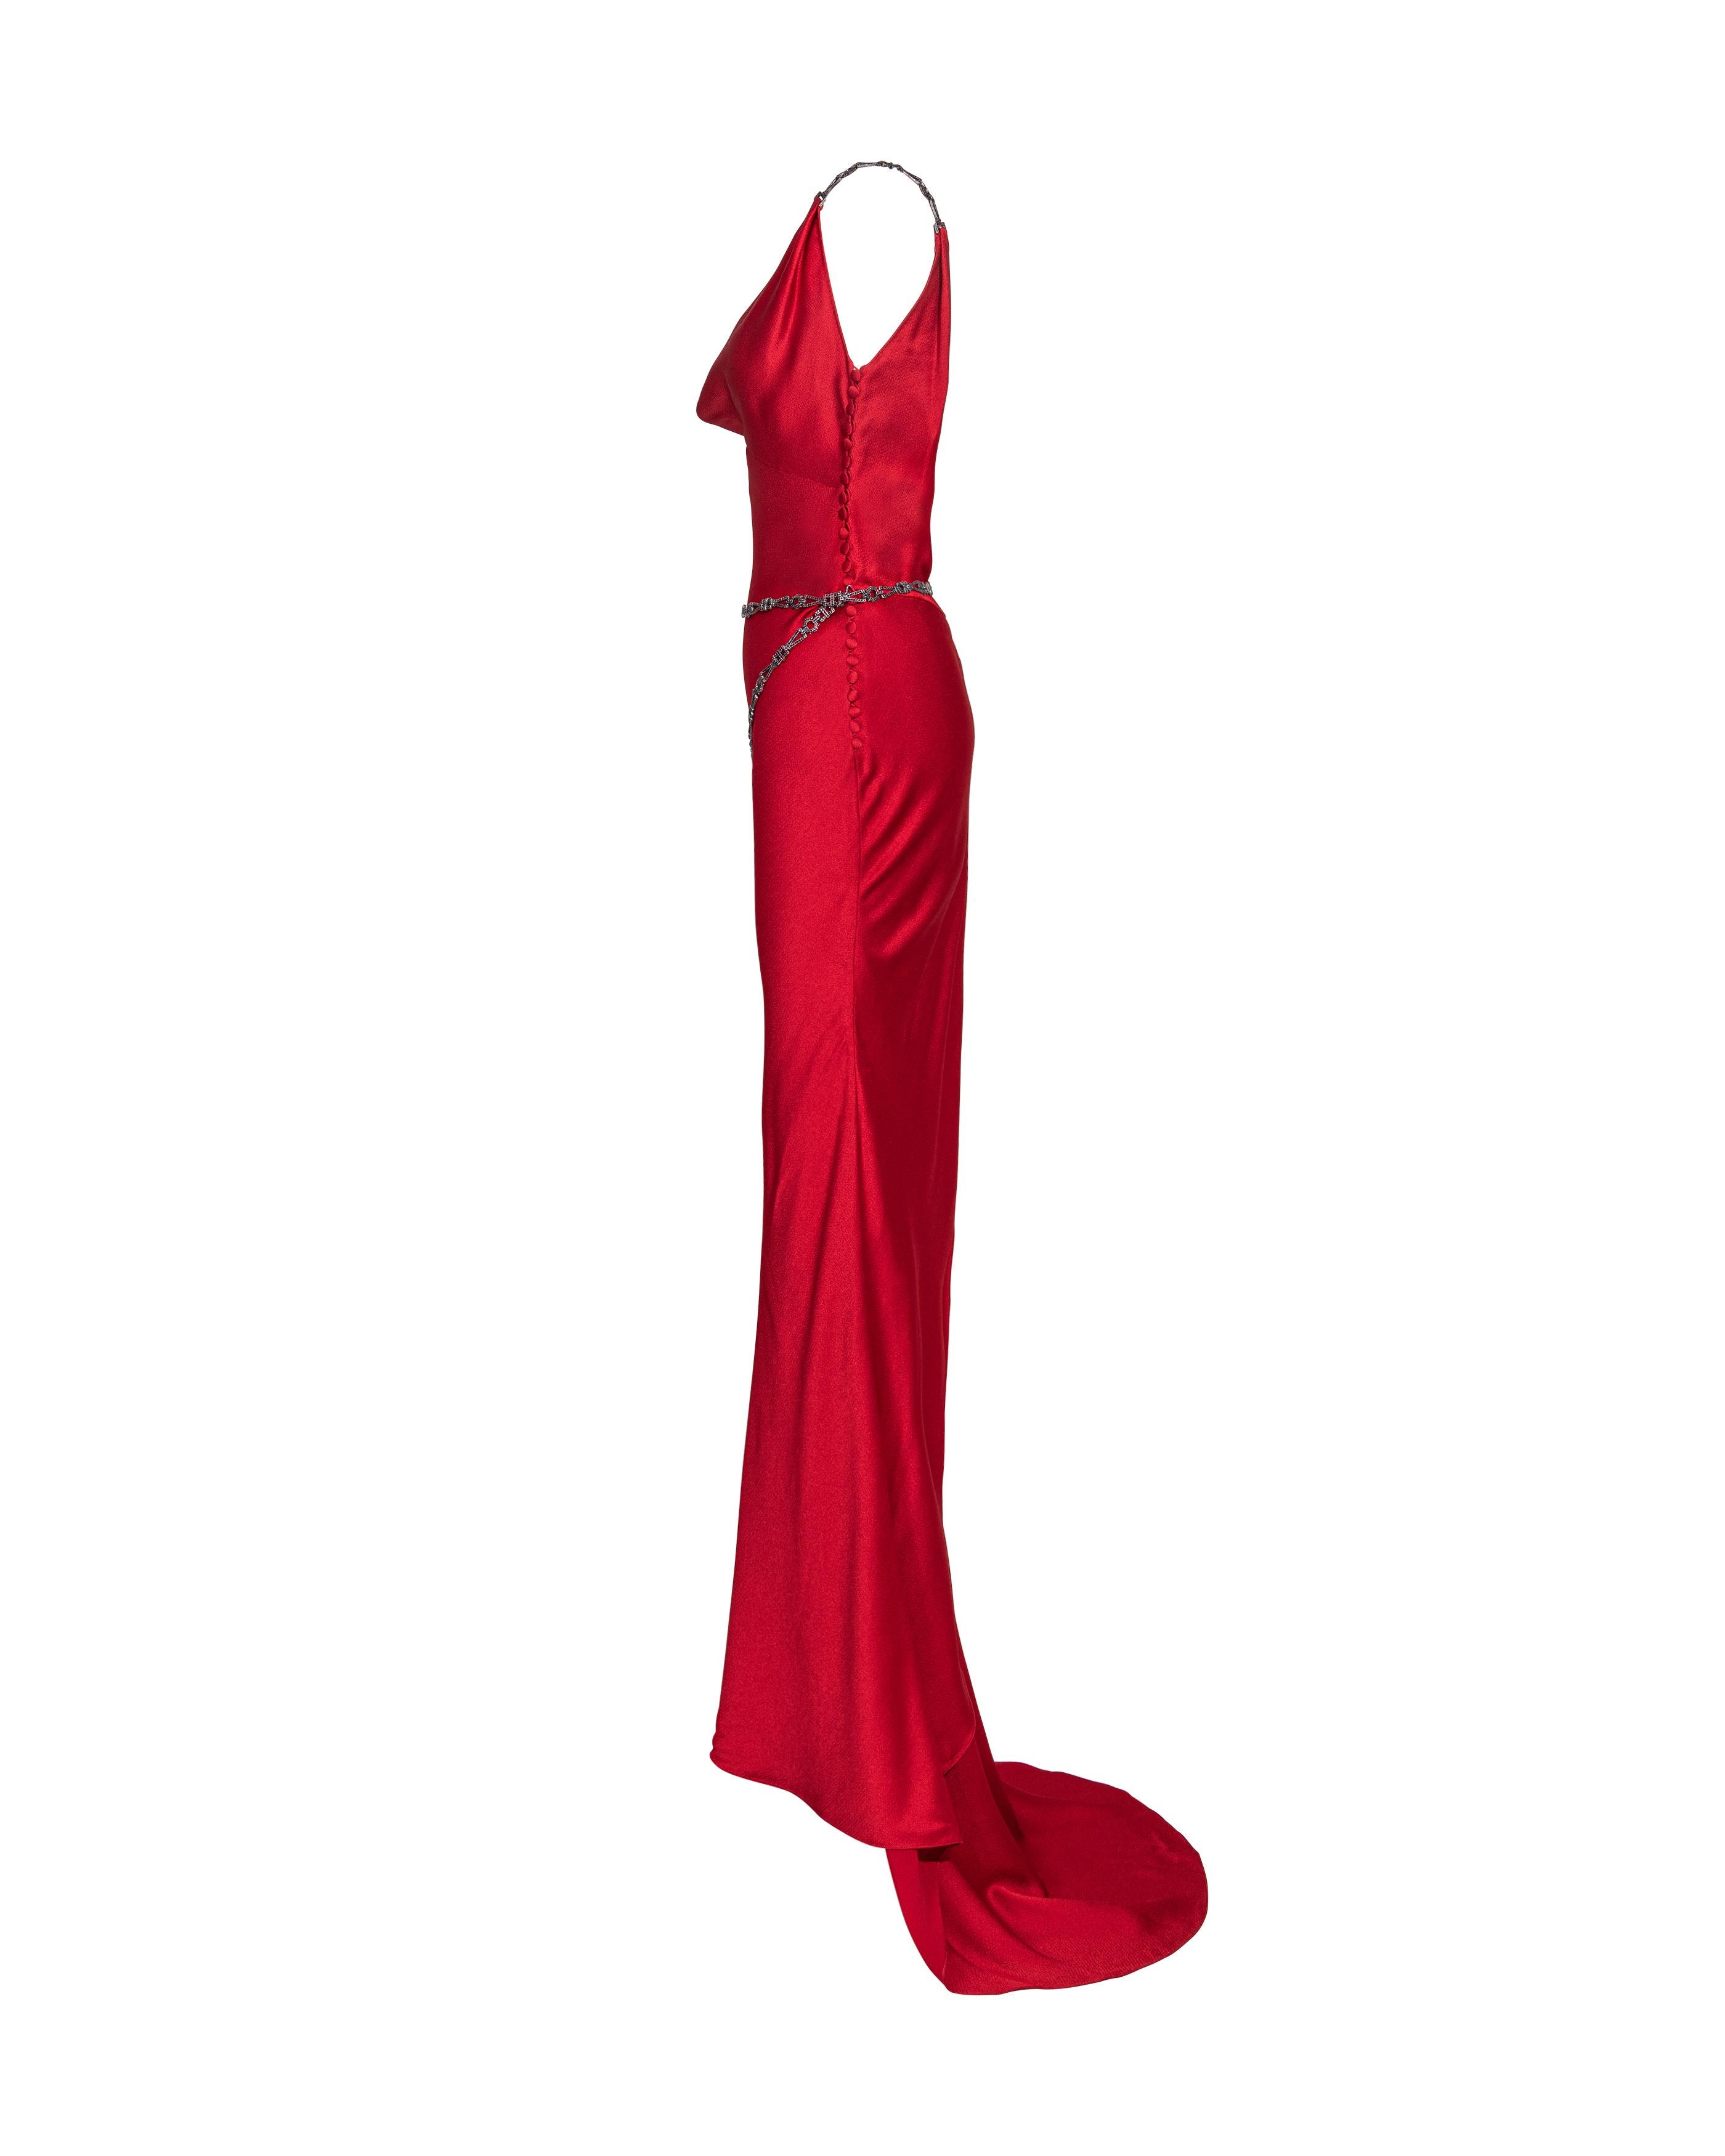 S/S 2000 Christian Dior by John Galliano Red Bias Cut Gown with Jeweled Belt In Excellent Condition In North Hollywood, CA